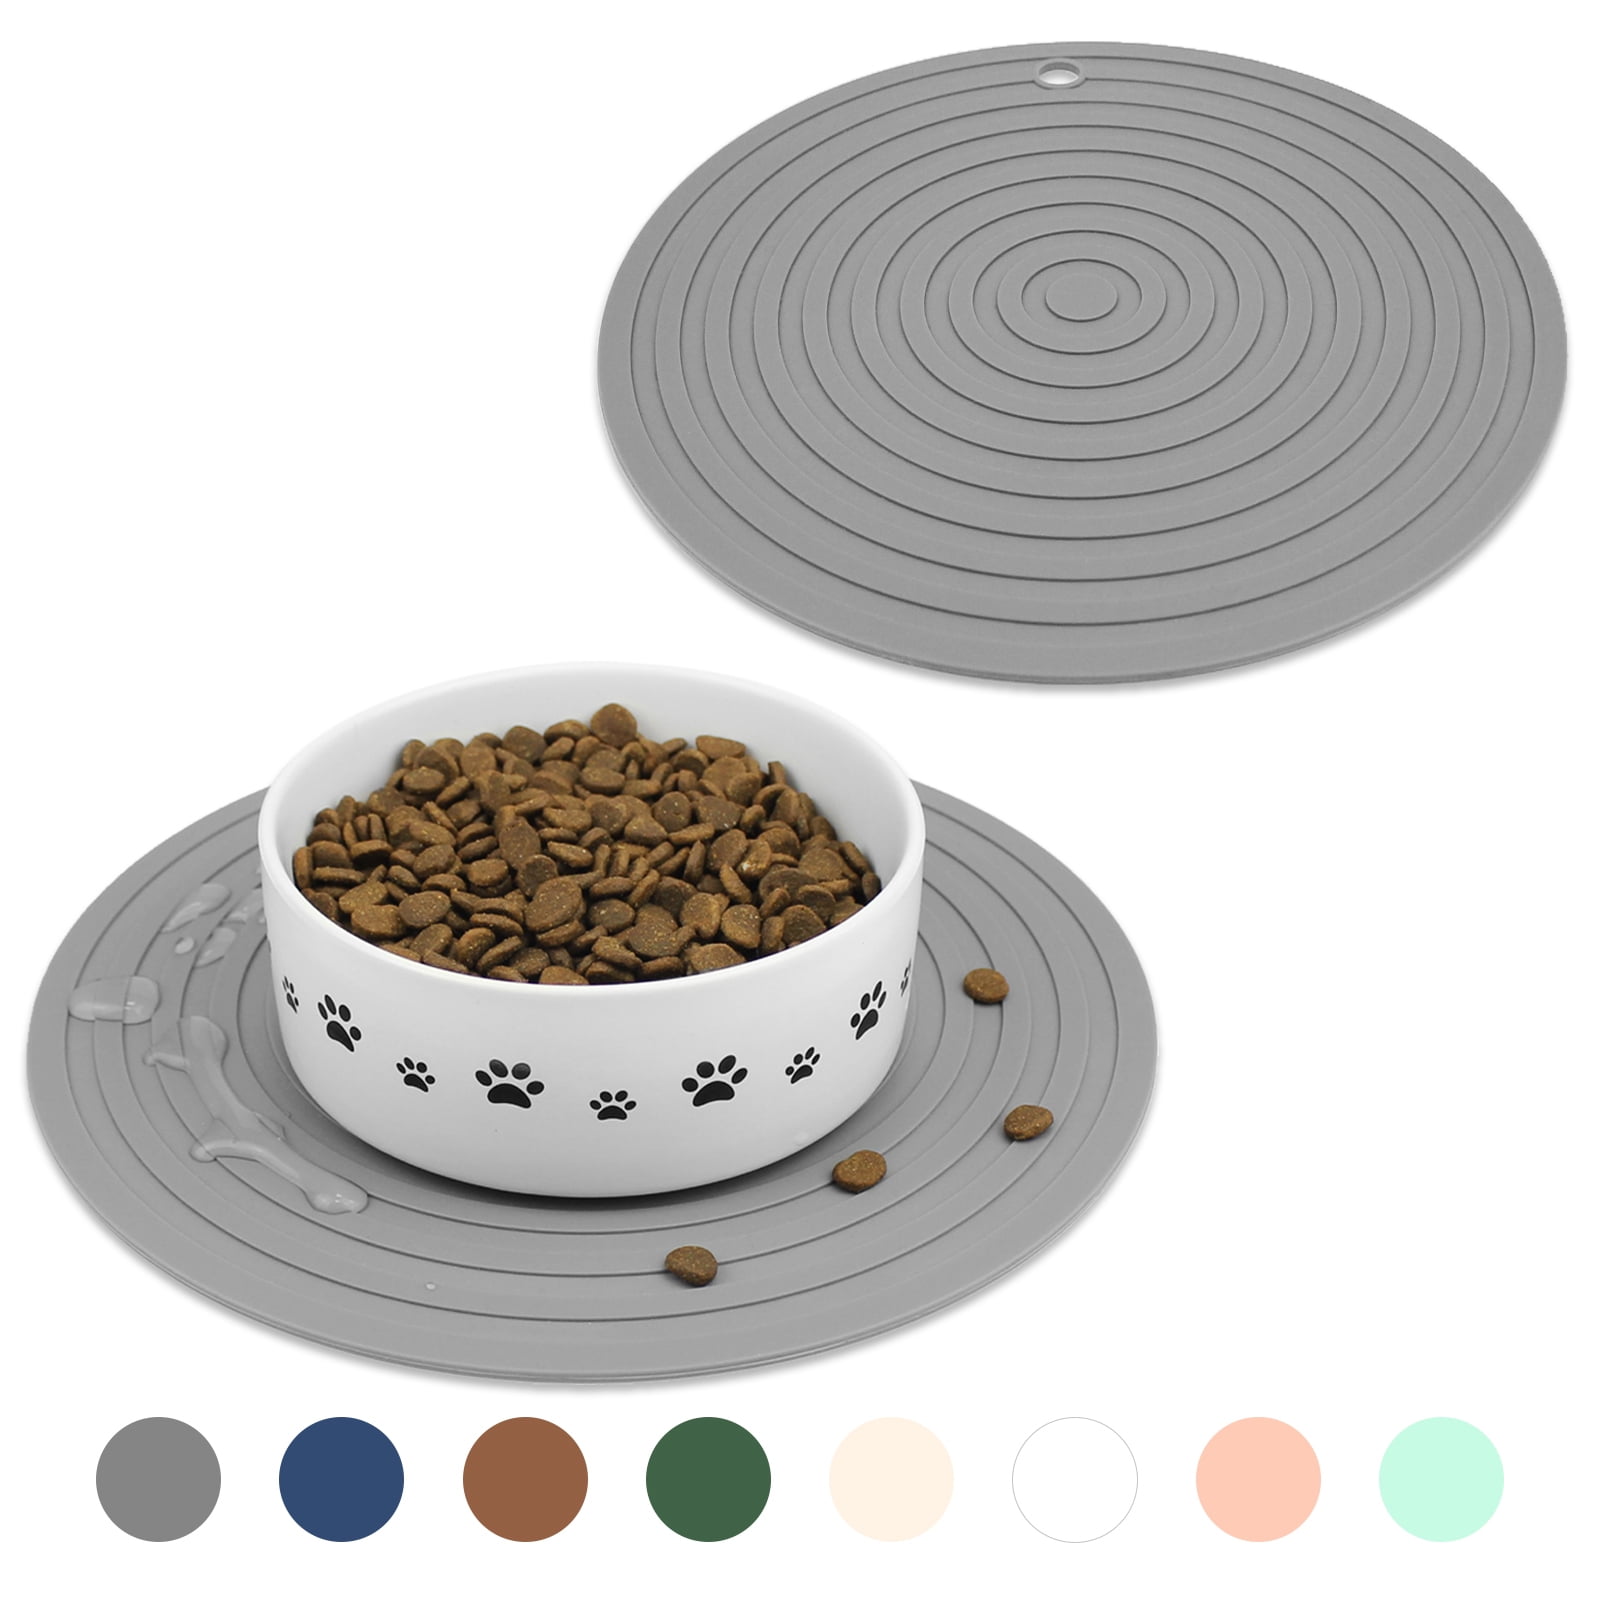 RNKR Reopet Large Silicone Dog Cat Bowl Mat Non-Stick Food Pad Water  Cushion FDA Approved Waterproof-GRAY